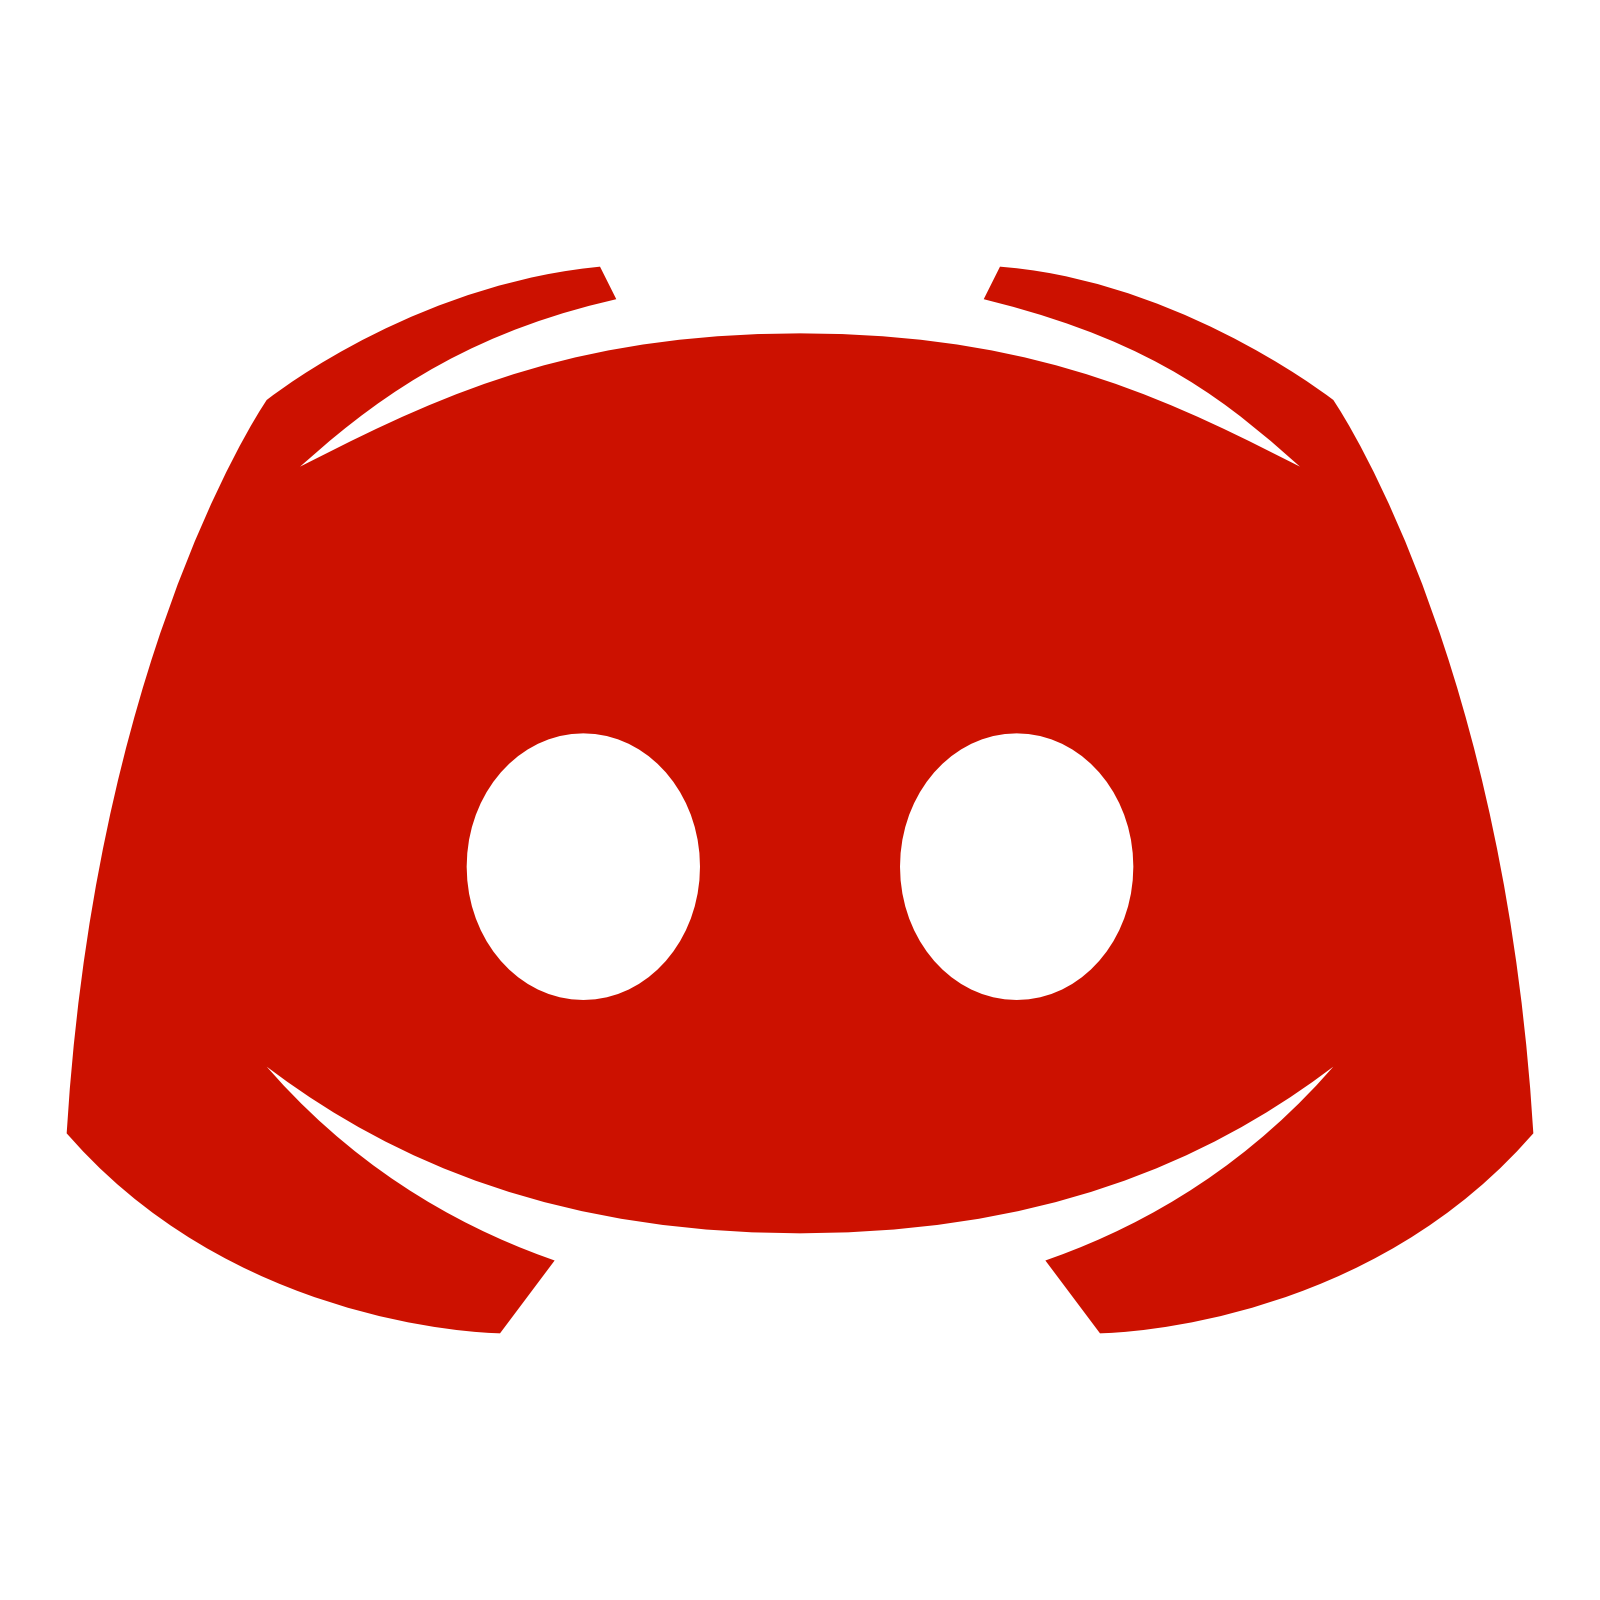 Red Discord Logo Transparent Background  WICOMAIL